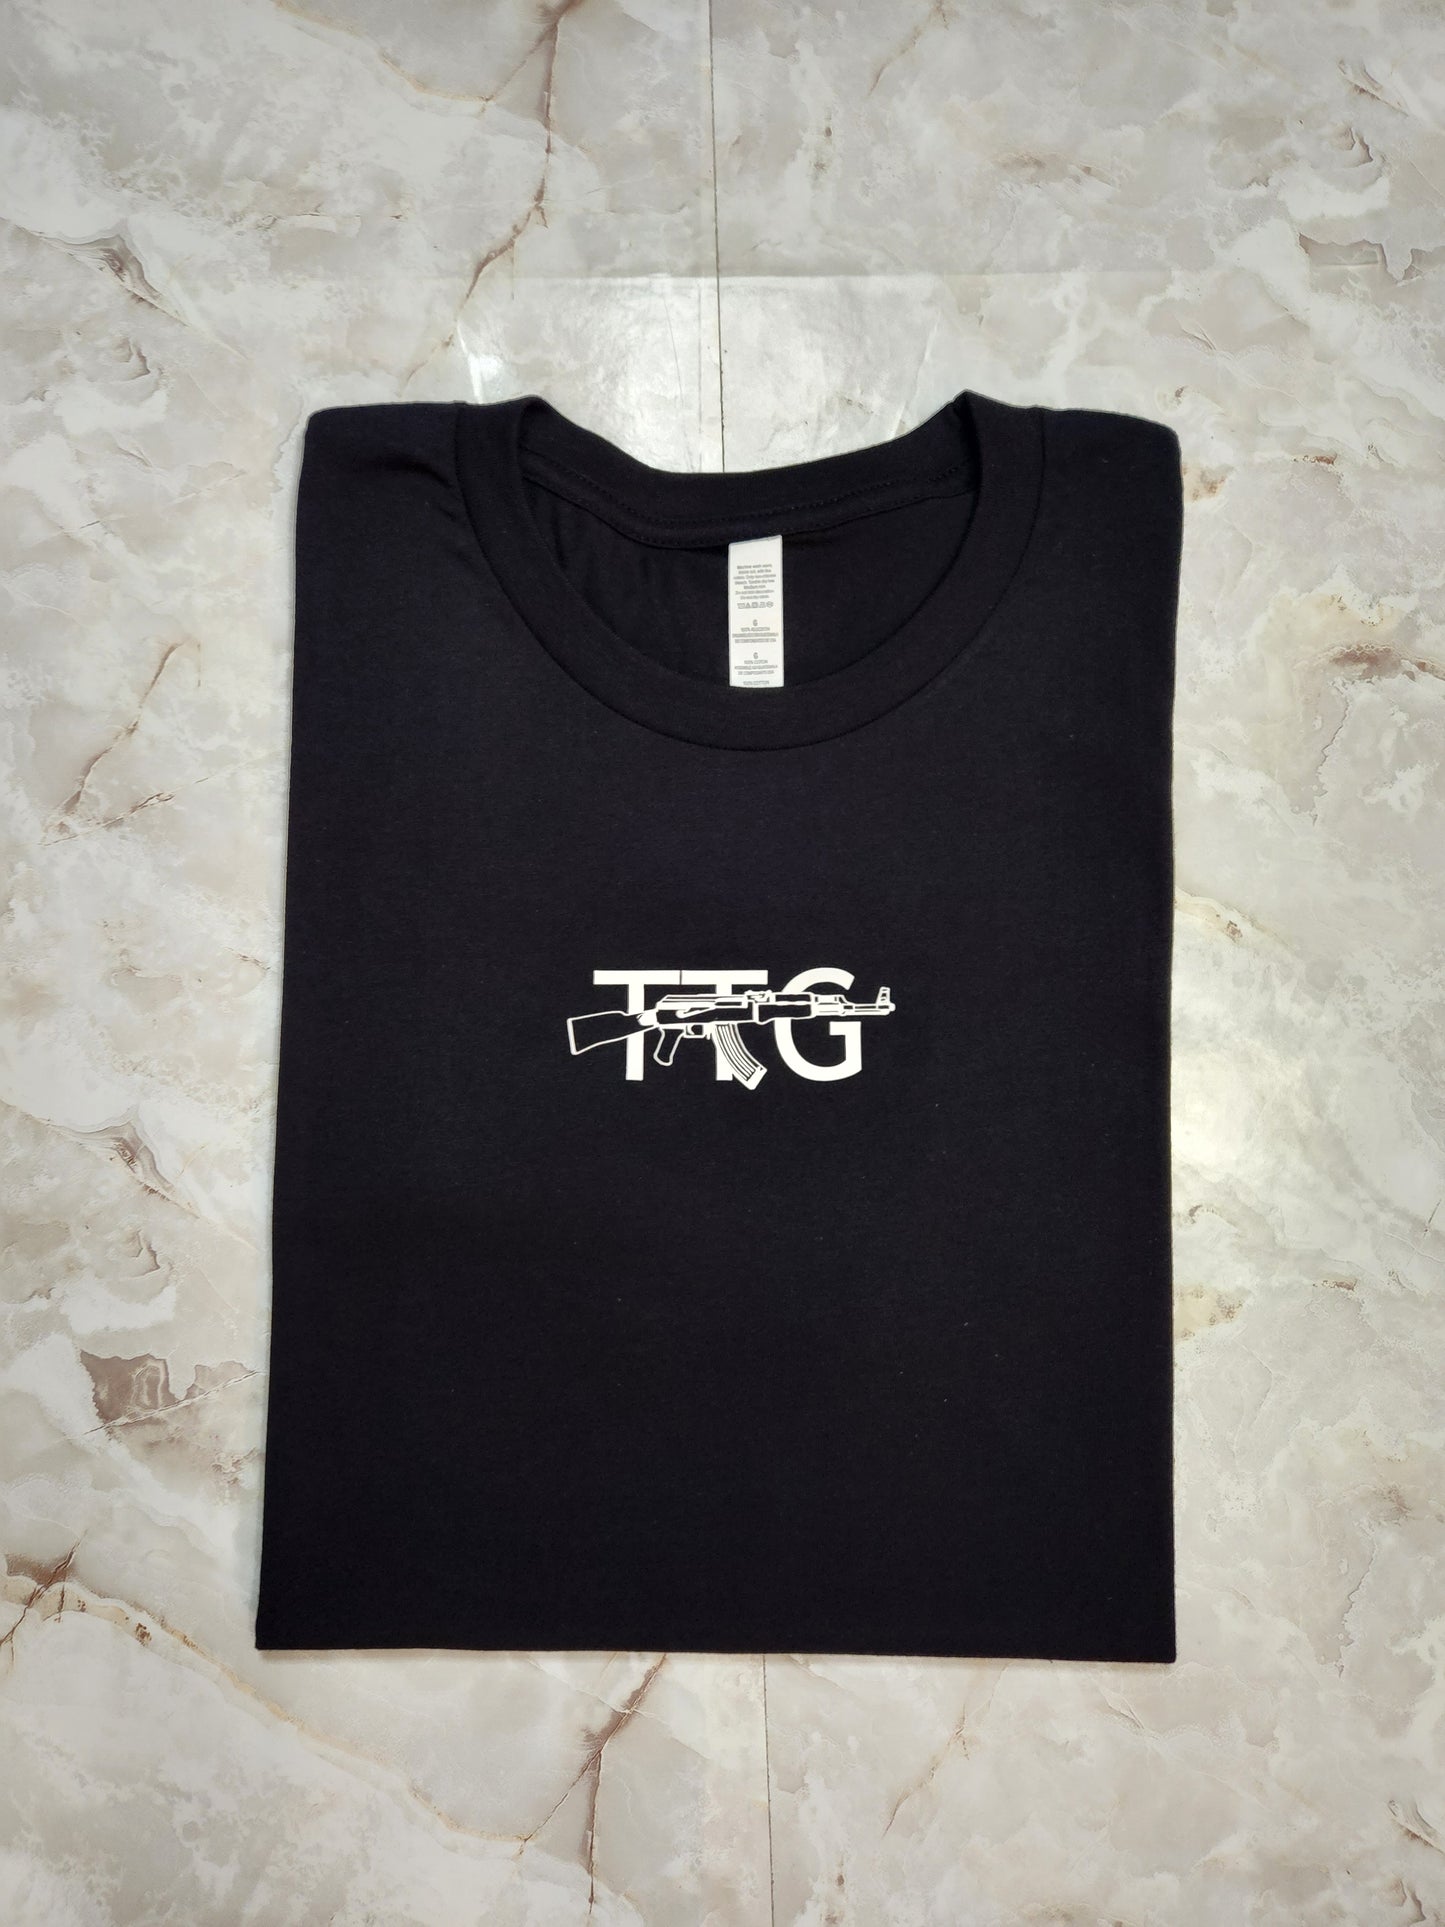 T.T.G T-Shirt - Centre Ave Clothing Co.